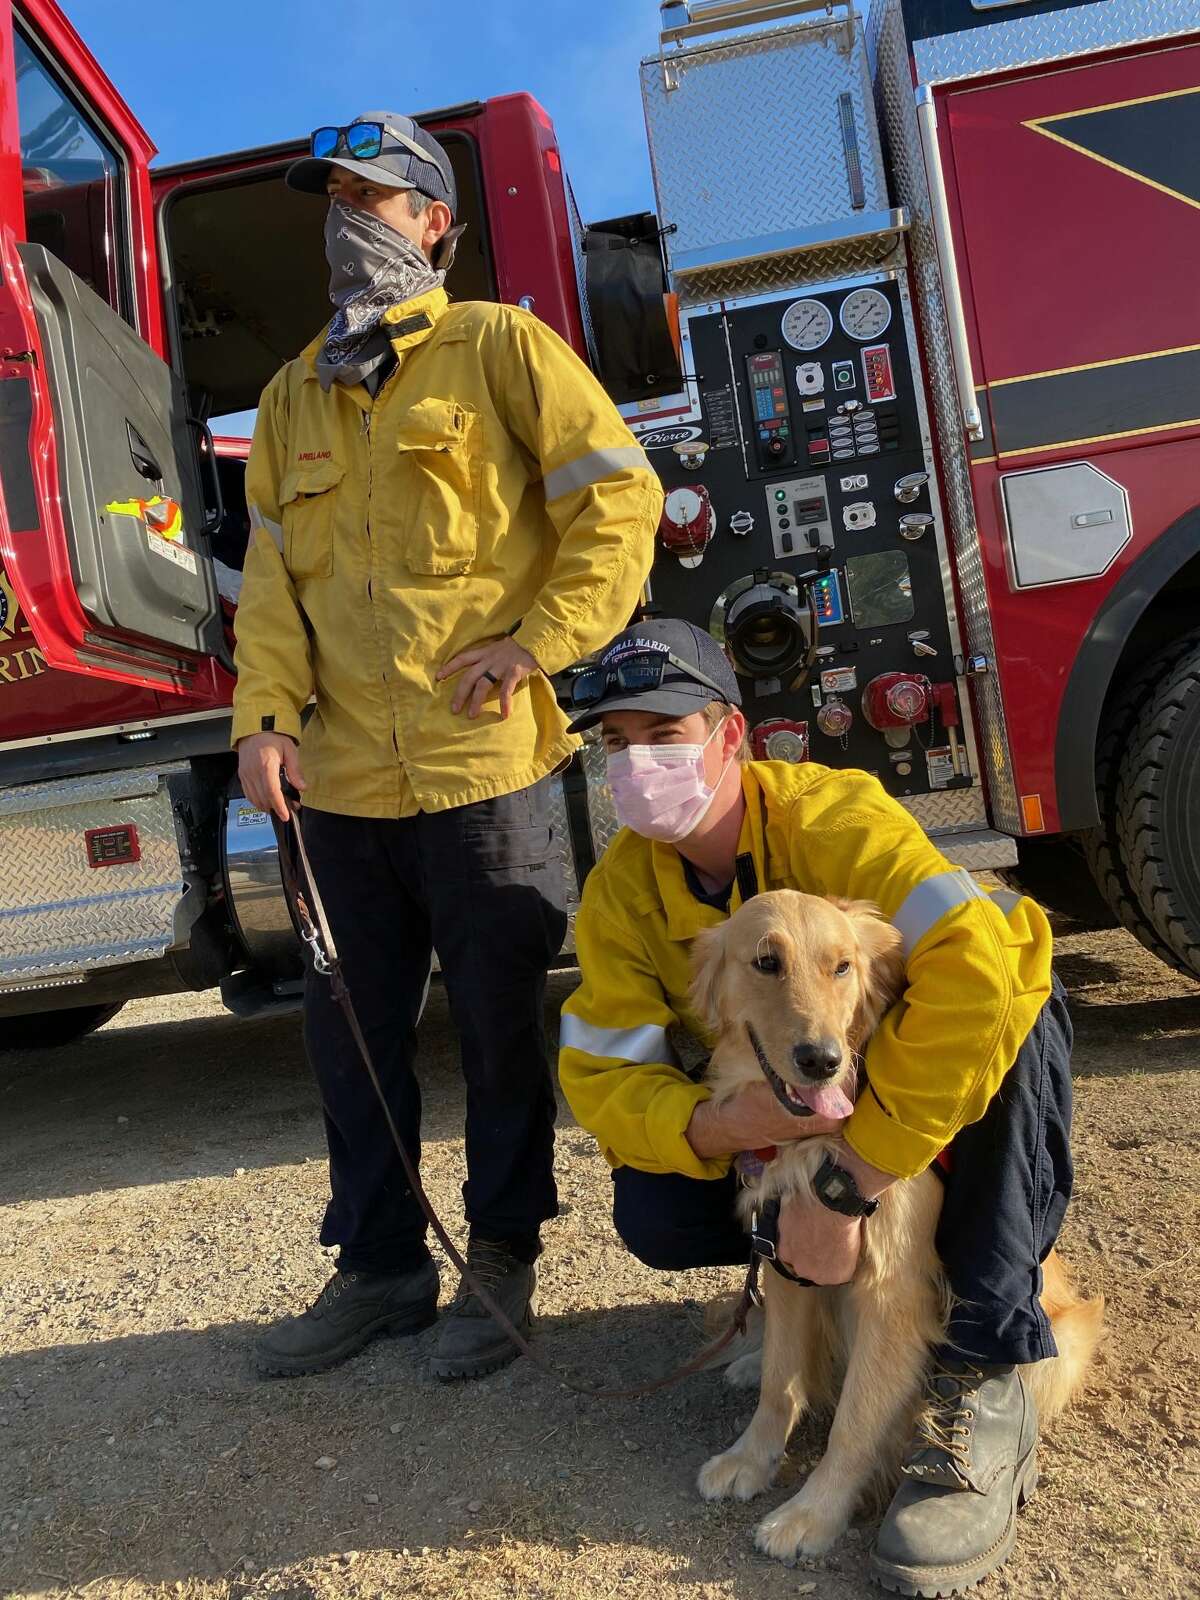 Kerith says hello to firefighters at the staging area of the Woodward Fire. She is a pet therapy dog popular among the firefighters in Marin County.